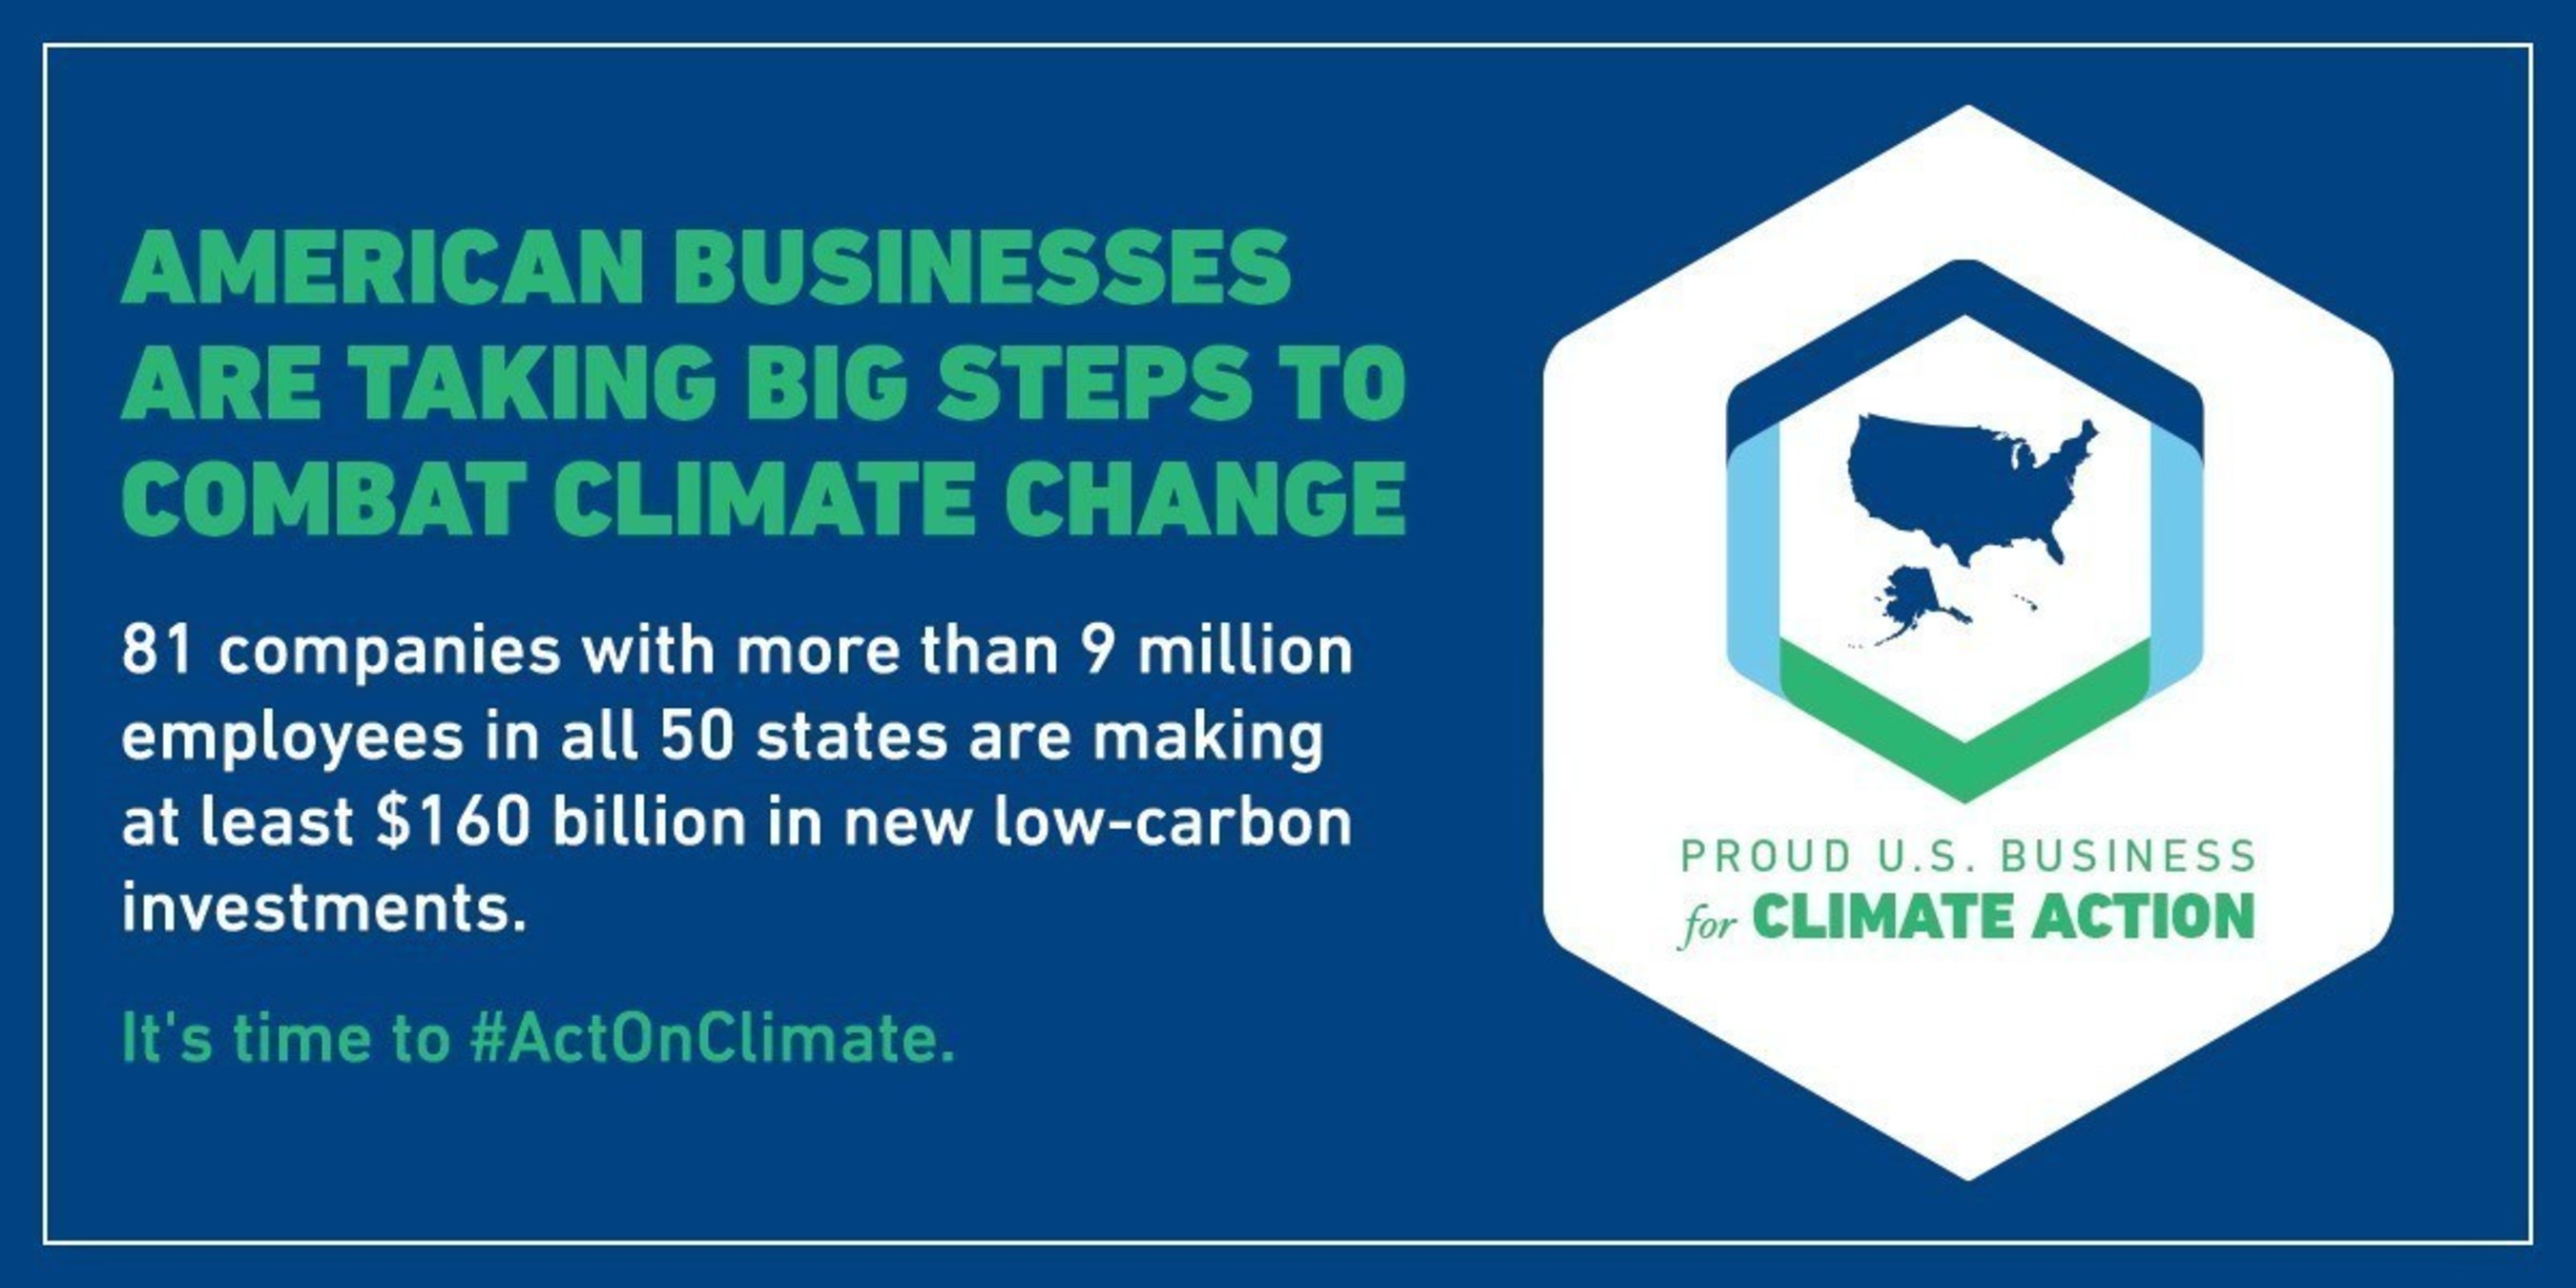 Ricoh has joined the American Business Act on Climate Pledge, joining more than 60 companies from across the American economy that are demonstrating an ongoing commitment to climate action.